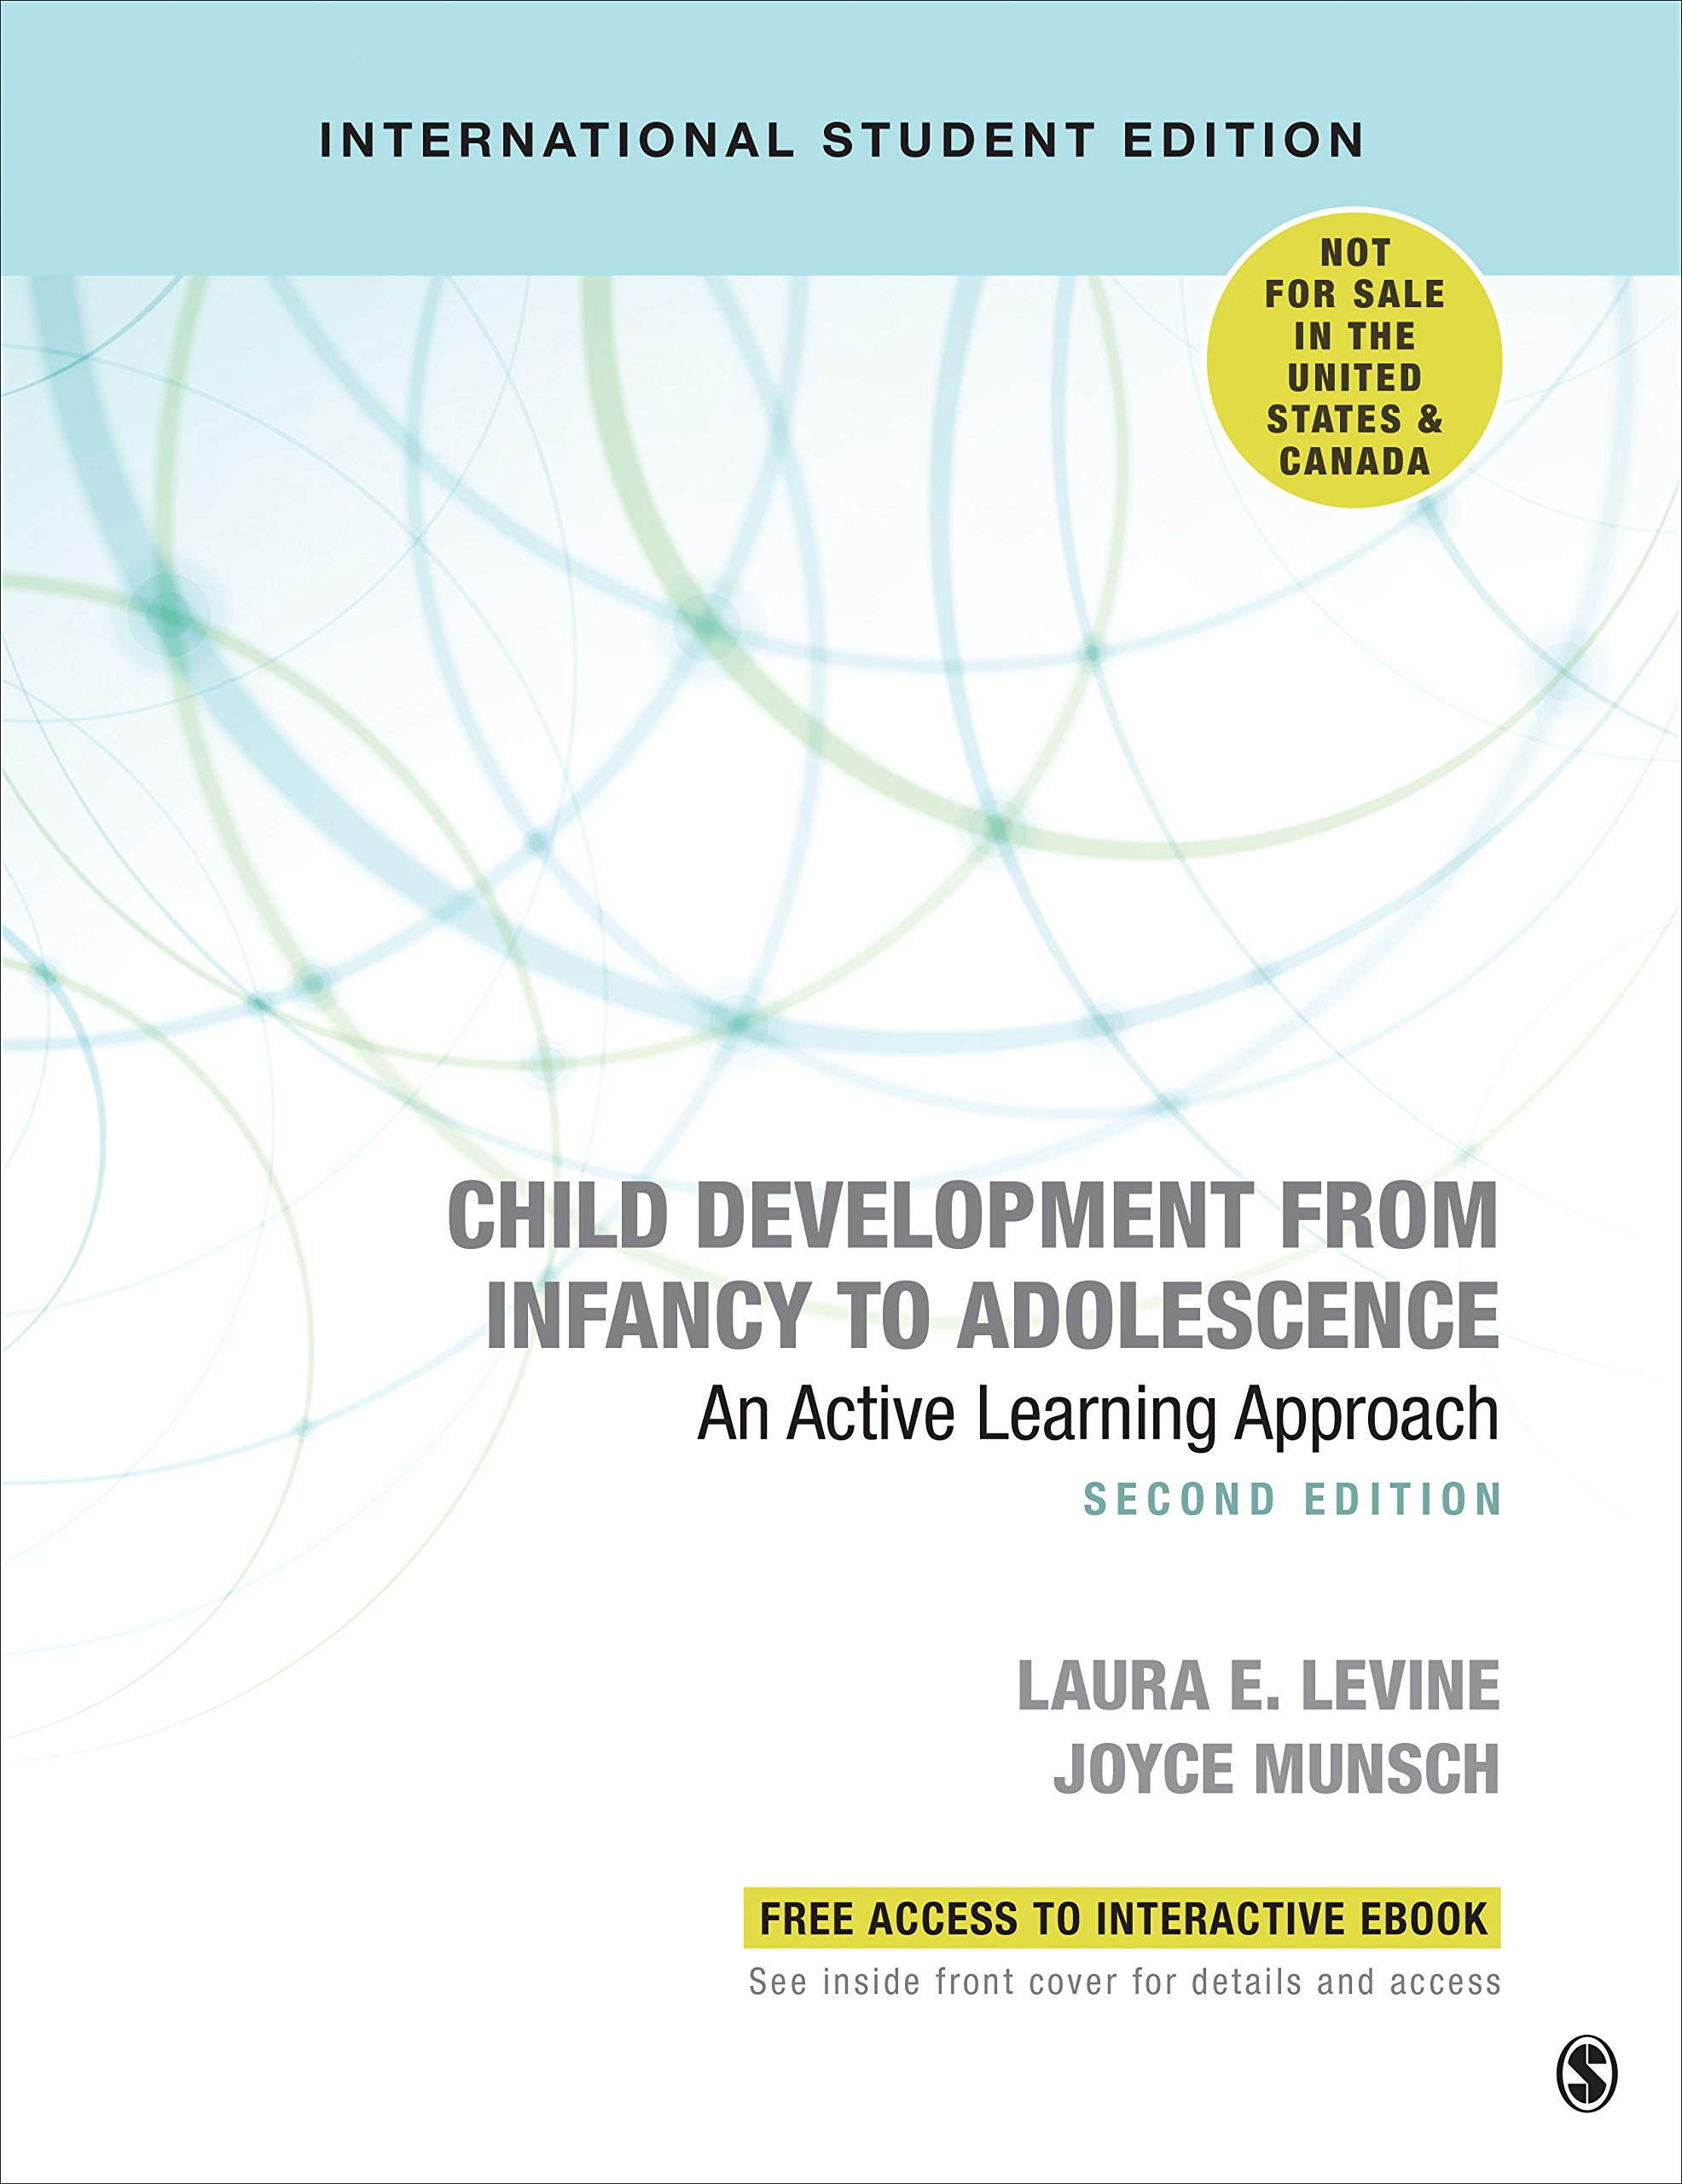 Child Development From Infancy to Adolescence